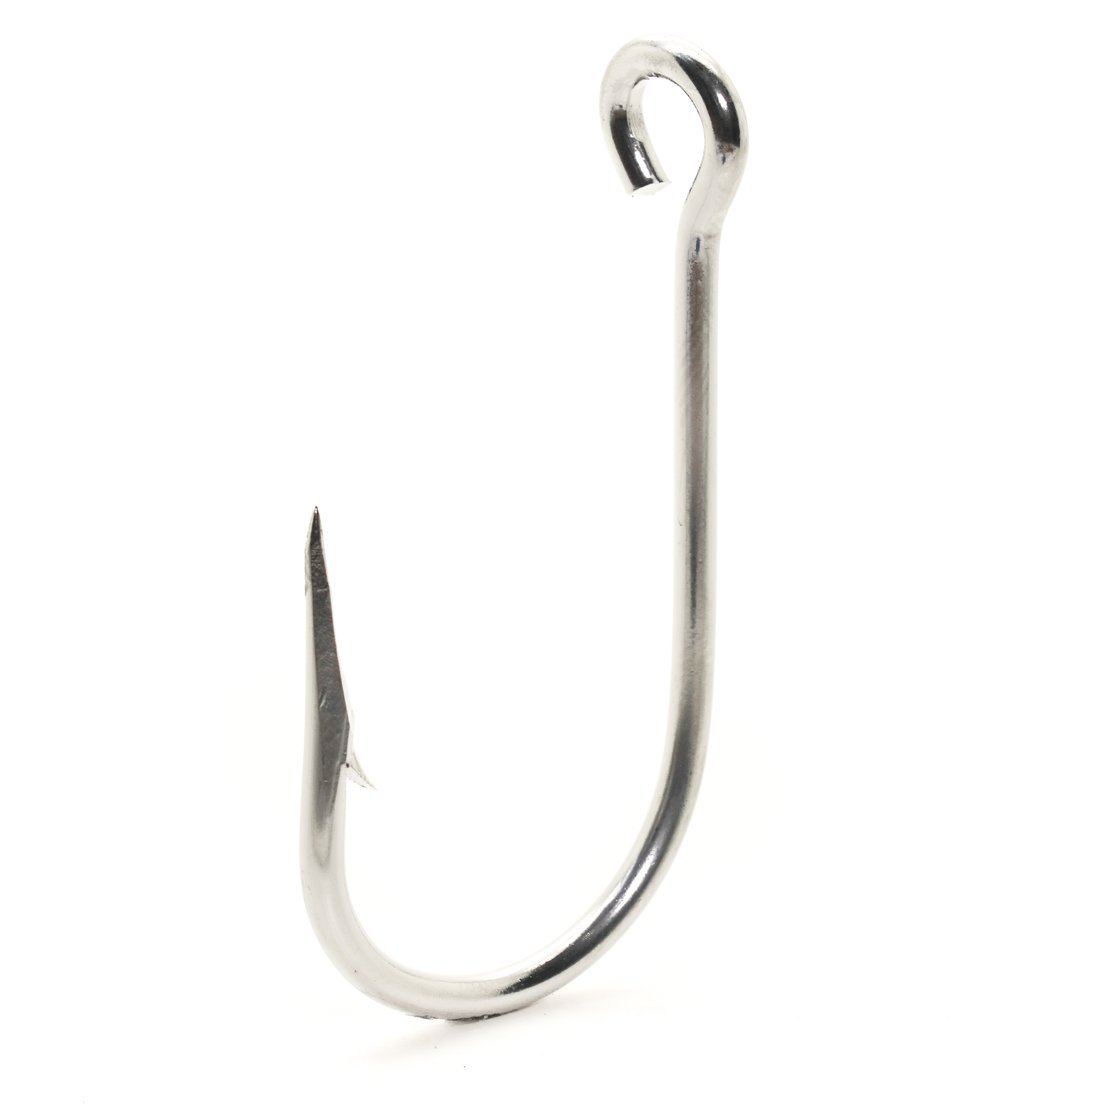 MUSTAD 95170-SS Salmon Siwash - 3x Strong - Stainless Steel Hooks (25